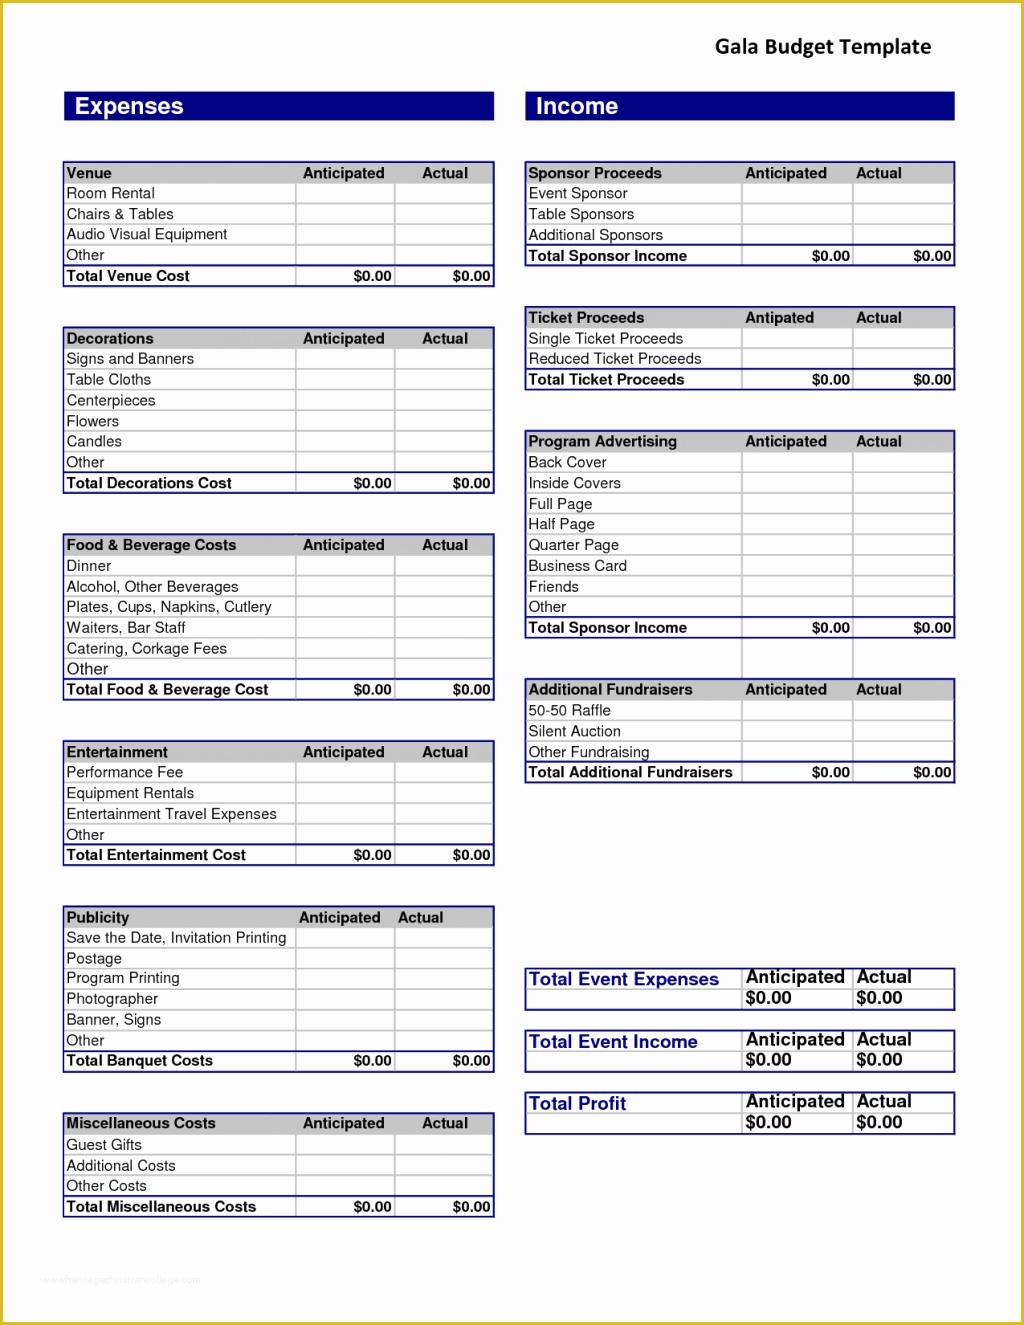 Free Business Budget Template Of Sample Business Bud Template forms Excel to Estimate